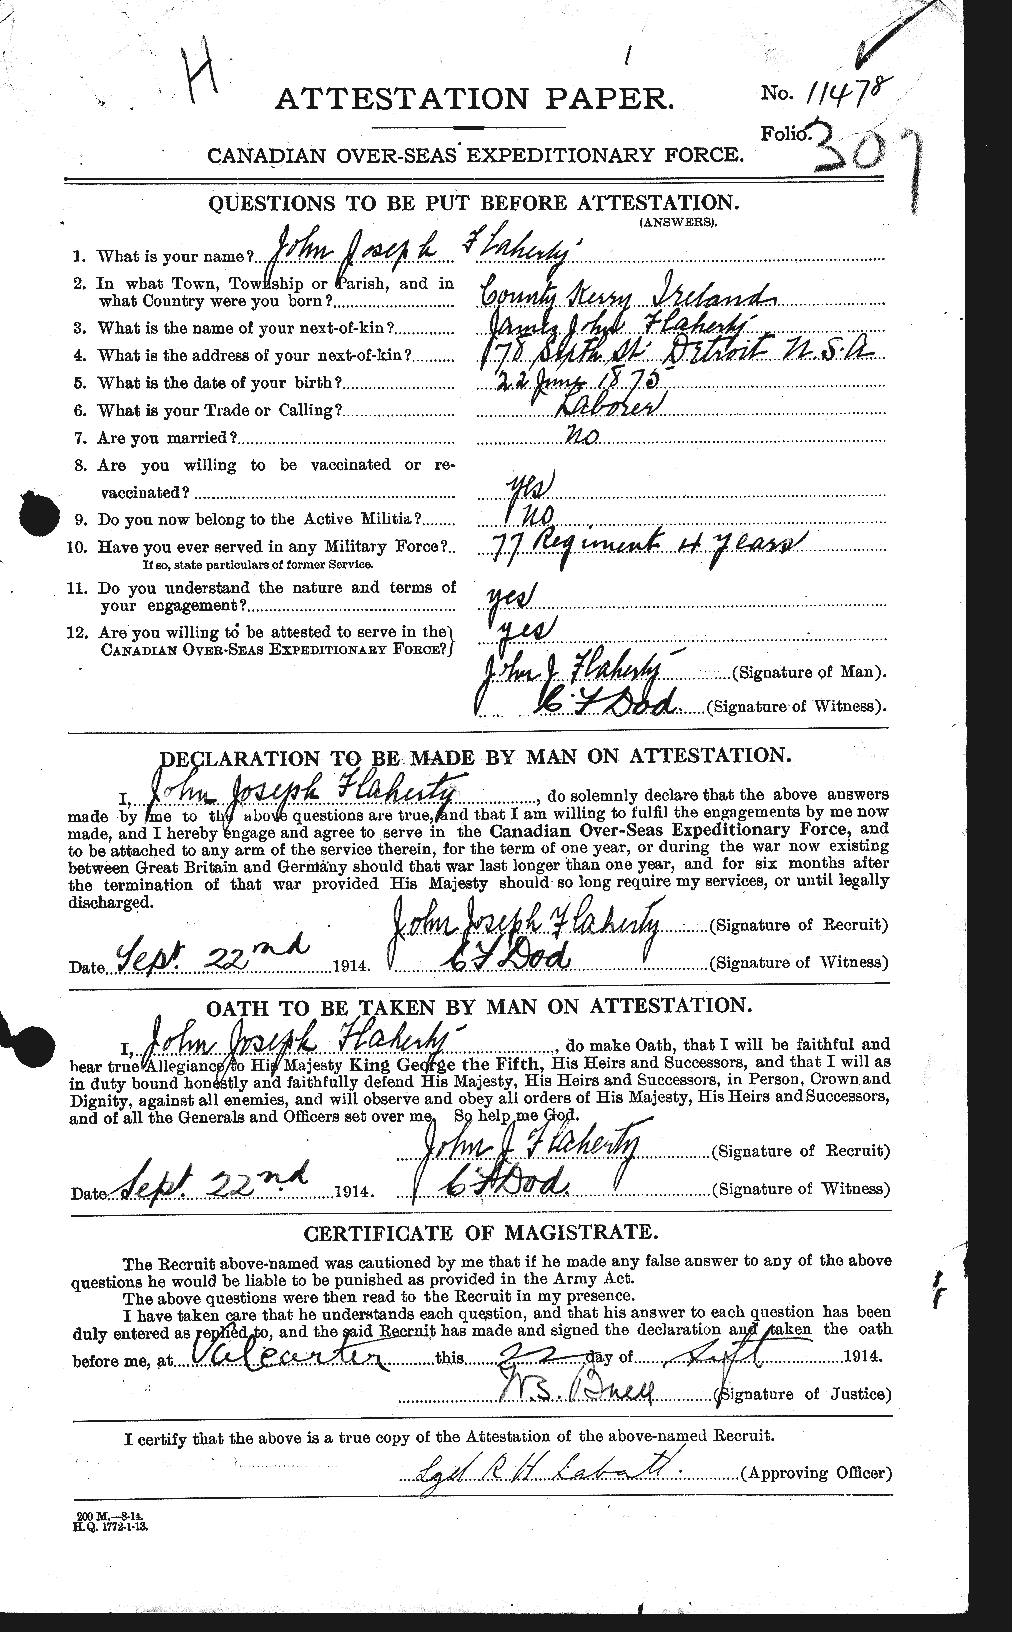 Personnel Records of the First World War - CEF 323363a